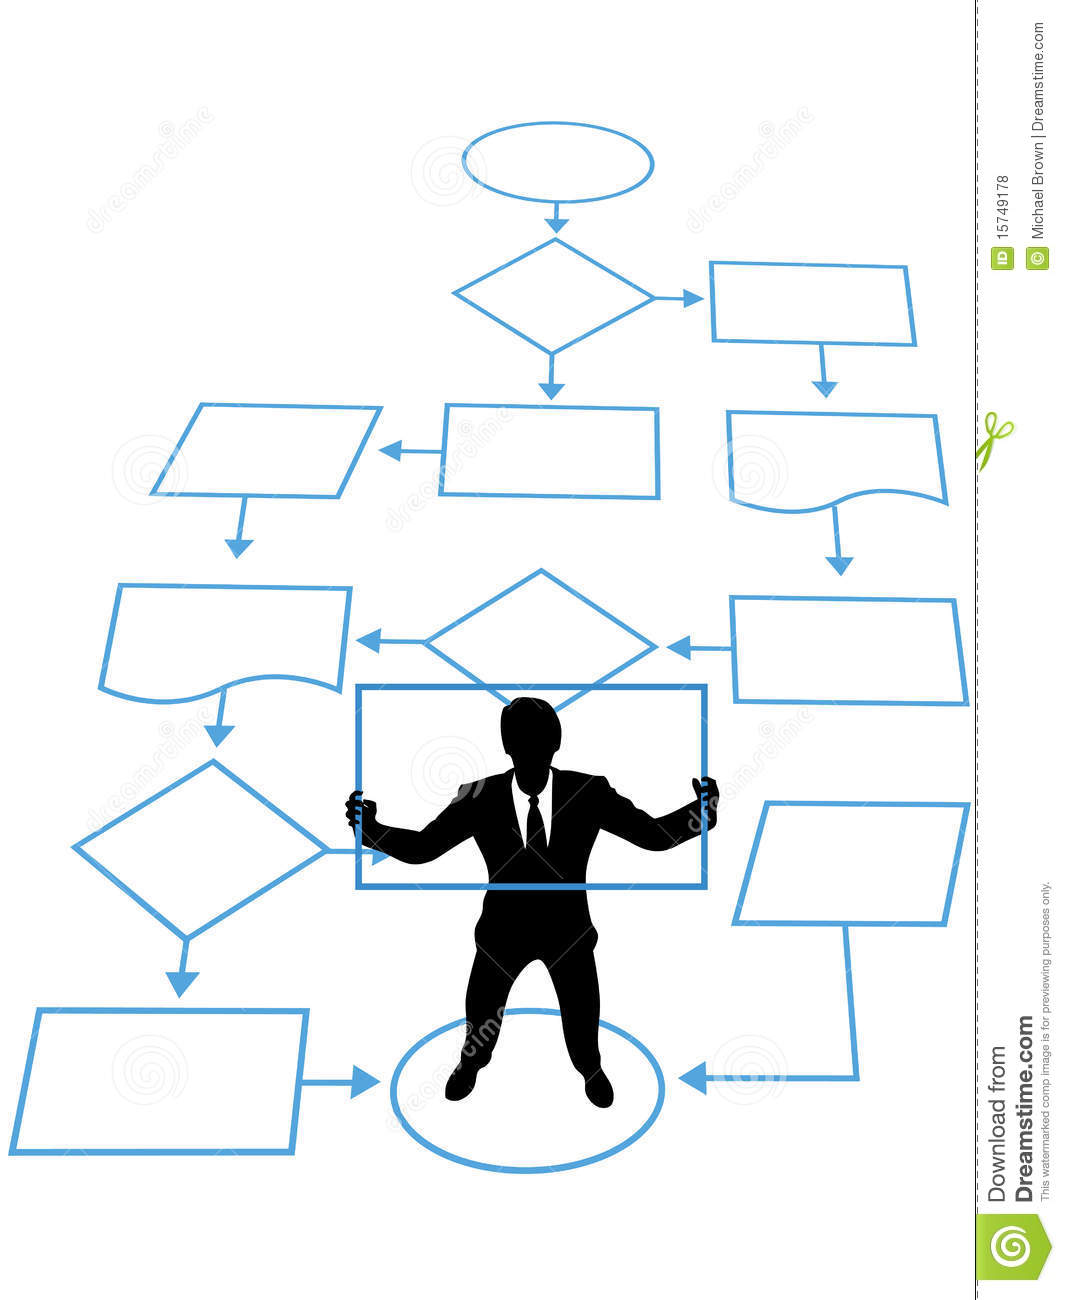 Person Is Process In Business Management Flowchart Royalty Free Stock